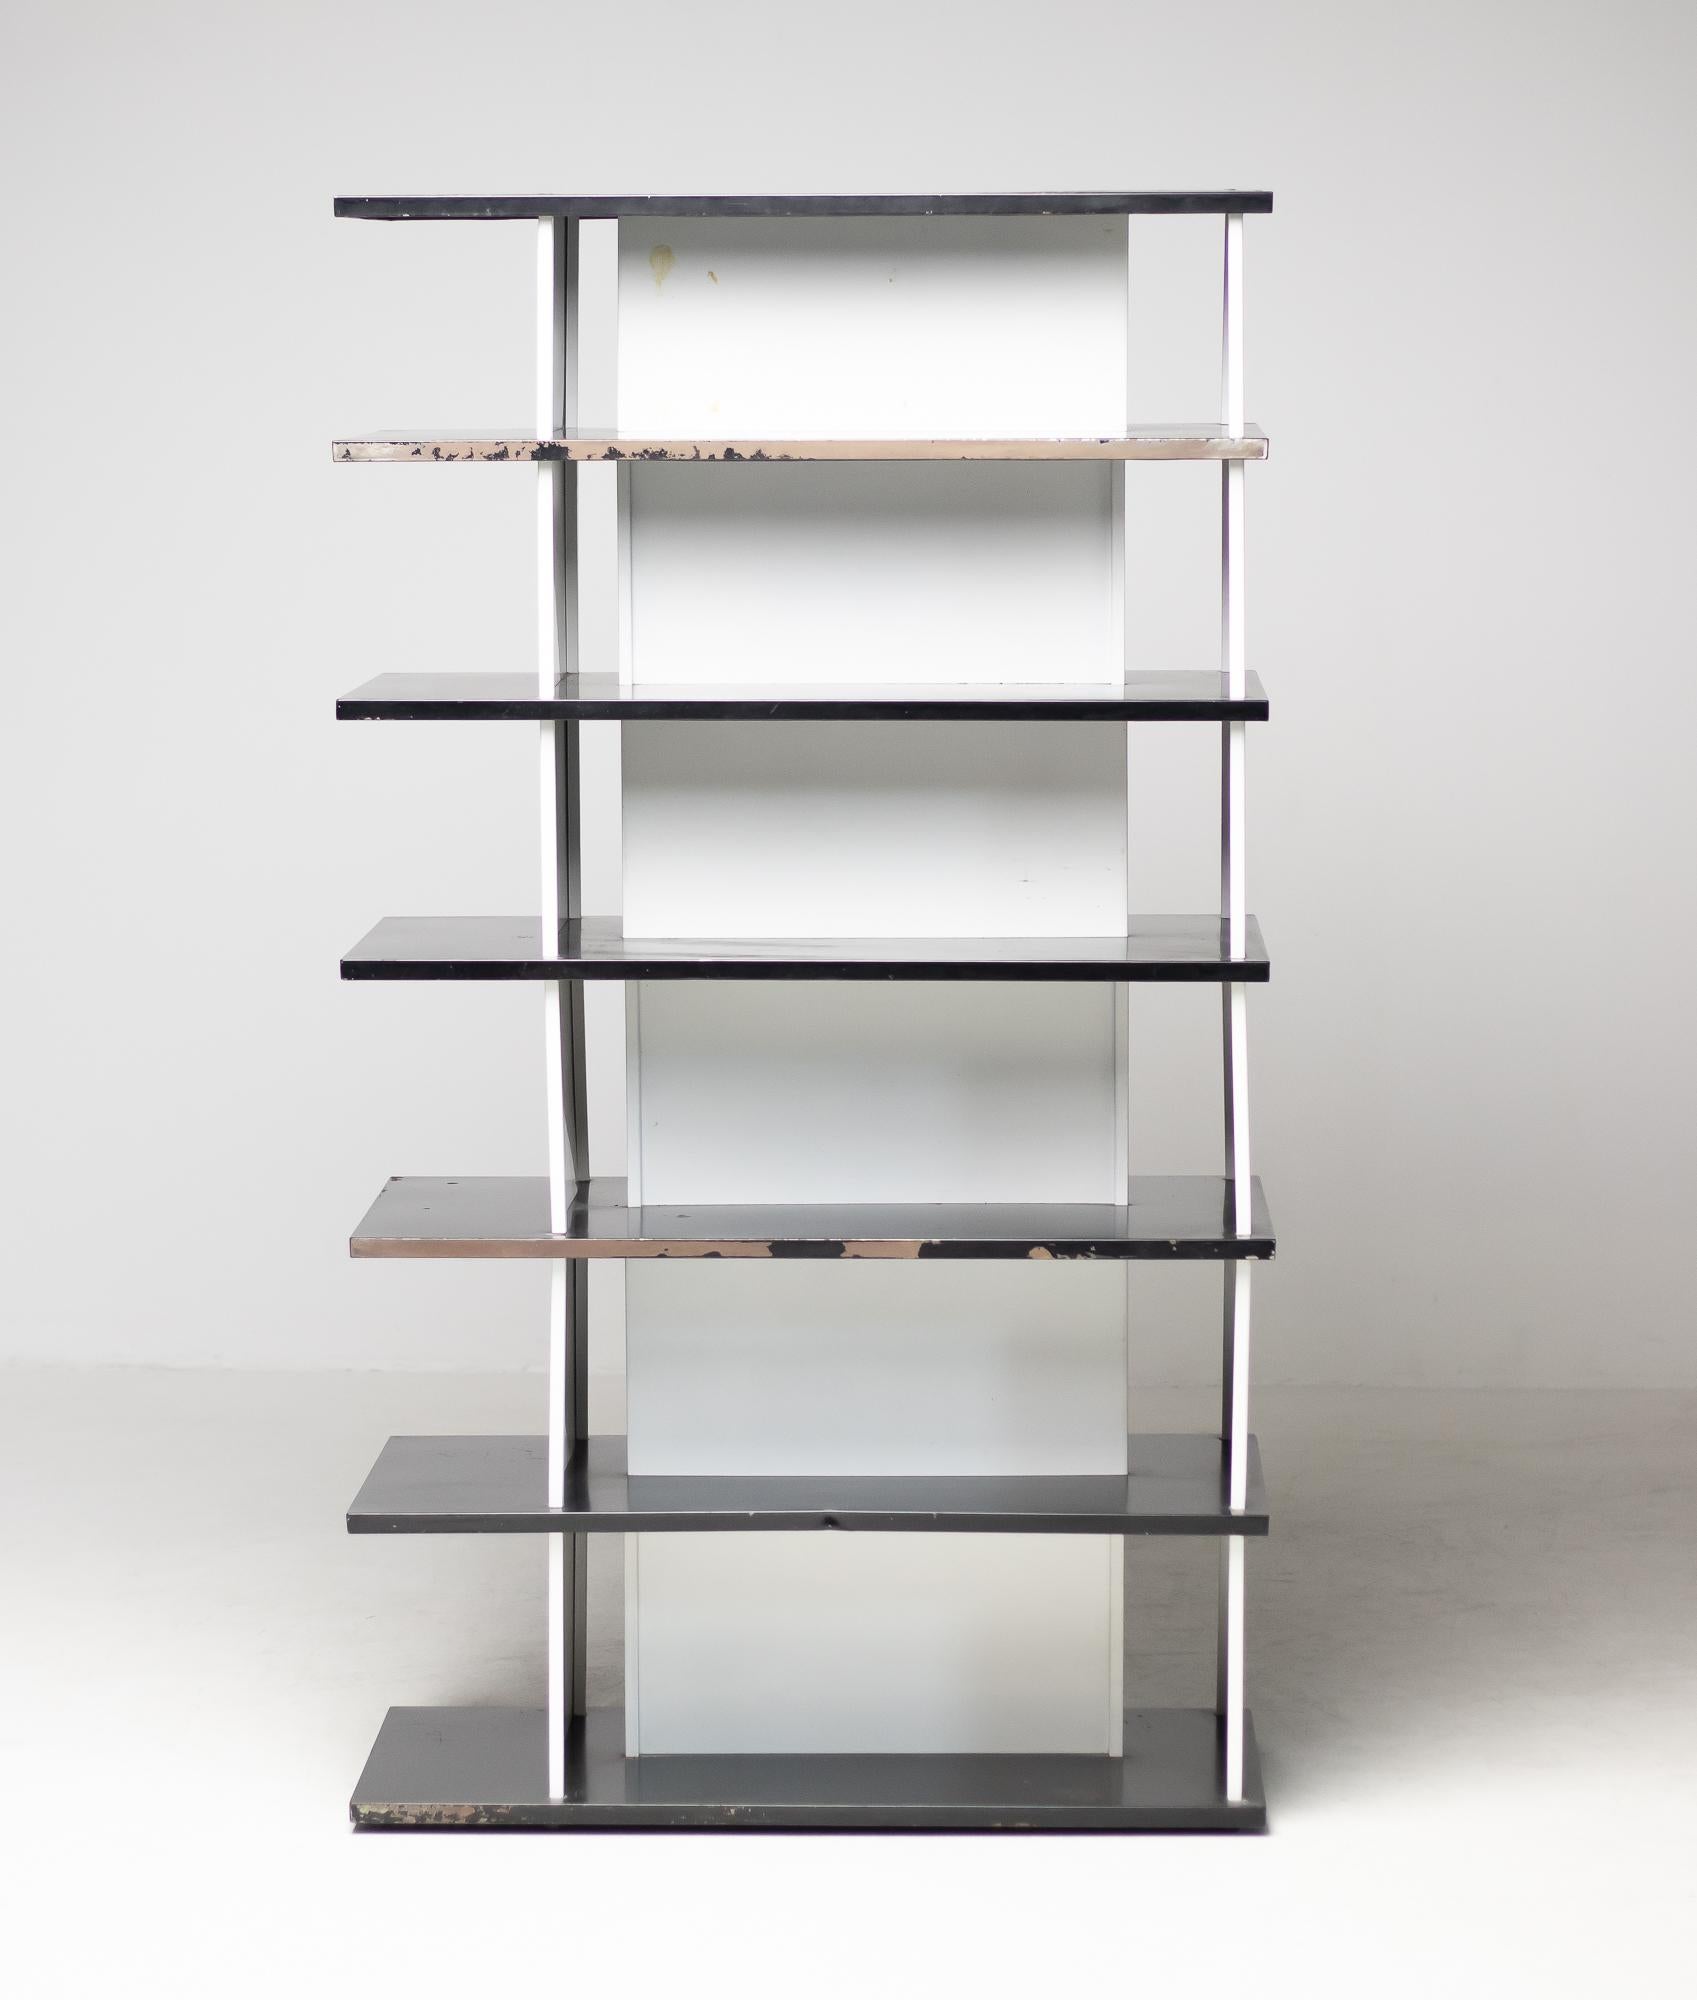 This detached bookcase is double sided and can also be used as a room divider.
Designed, on commission, by Wim Rietveld and sold exclusively through Amsterdam department store De Bijenkorf.
De Bijenkorf was renowned for selling the most forward